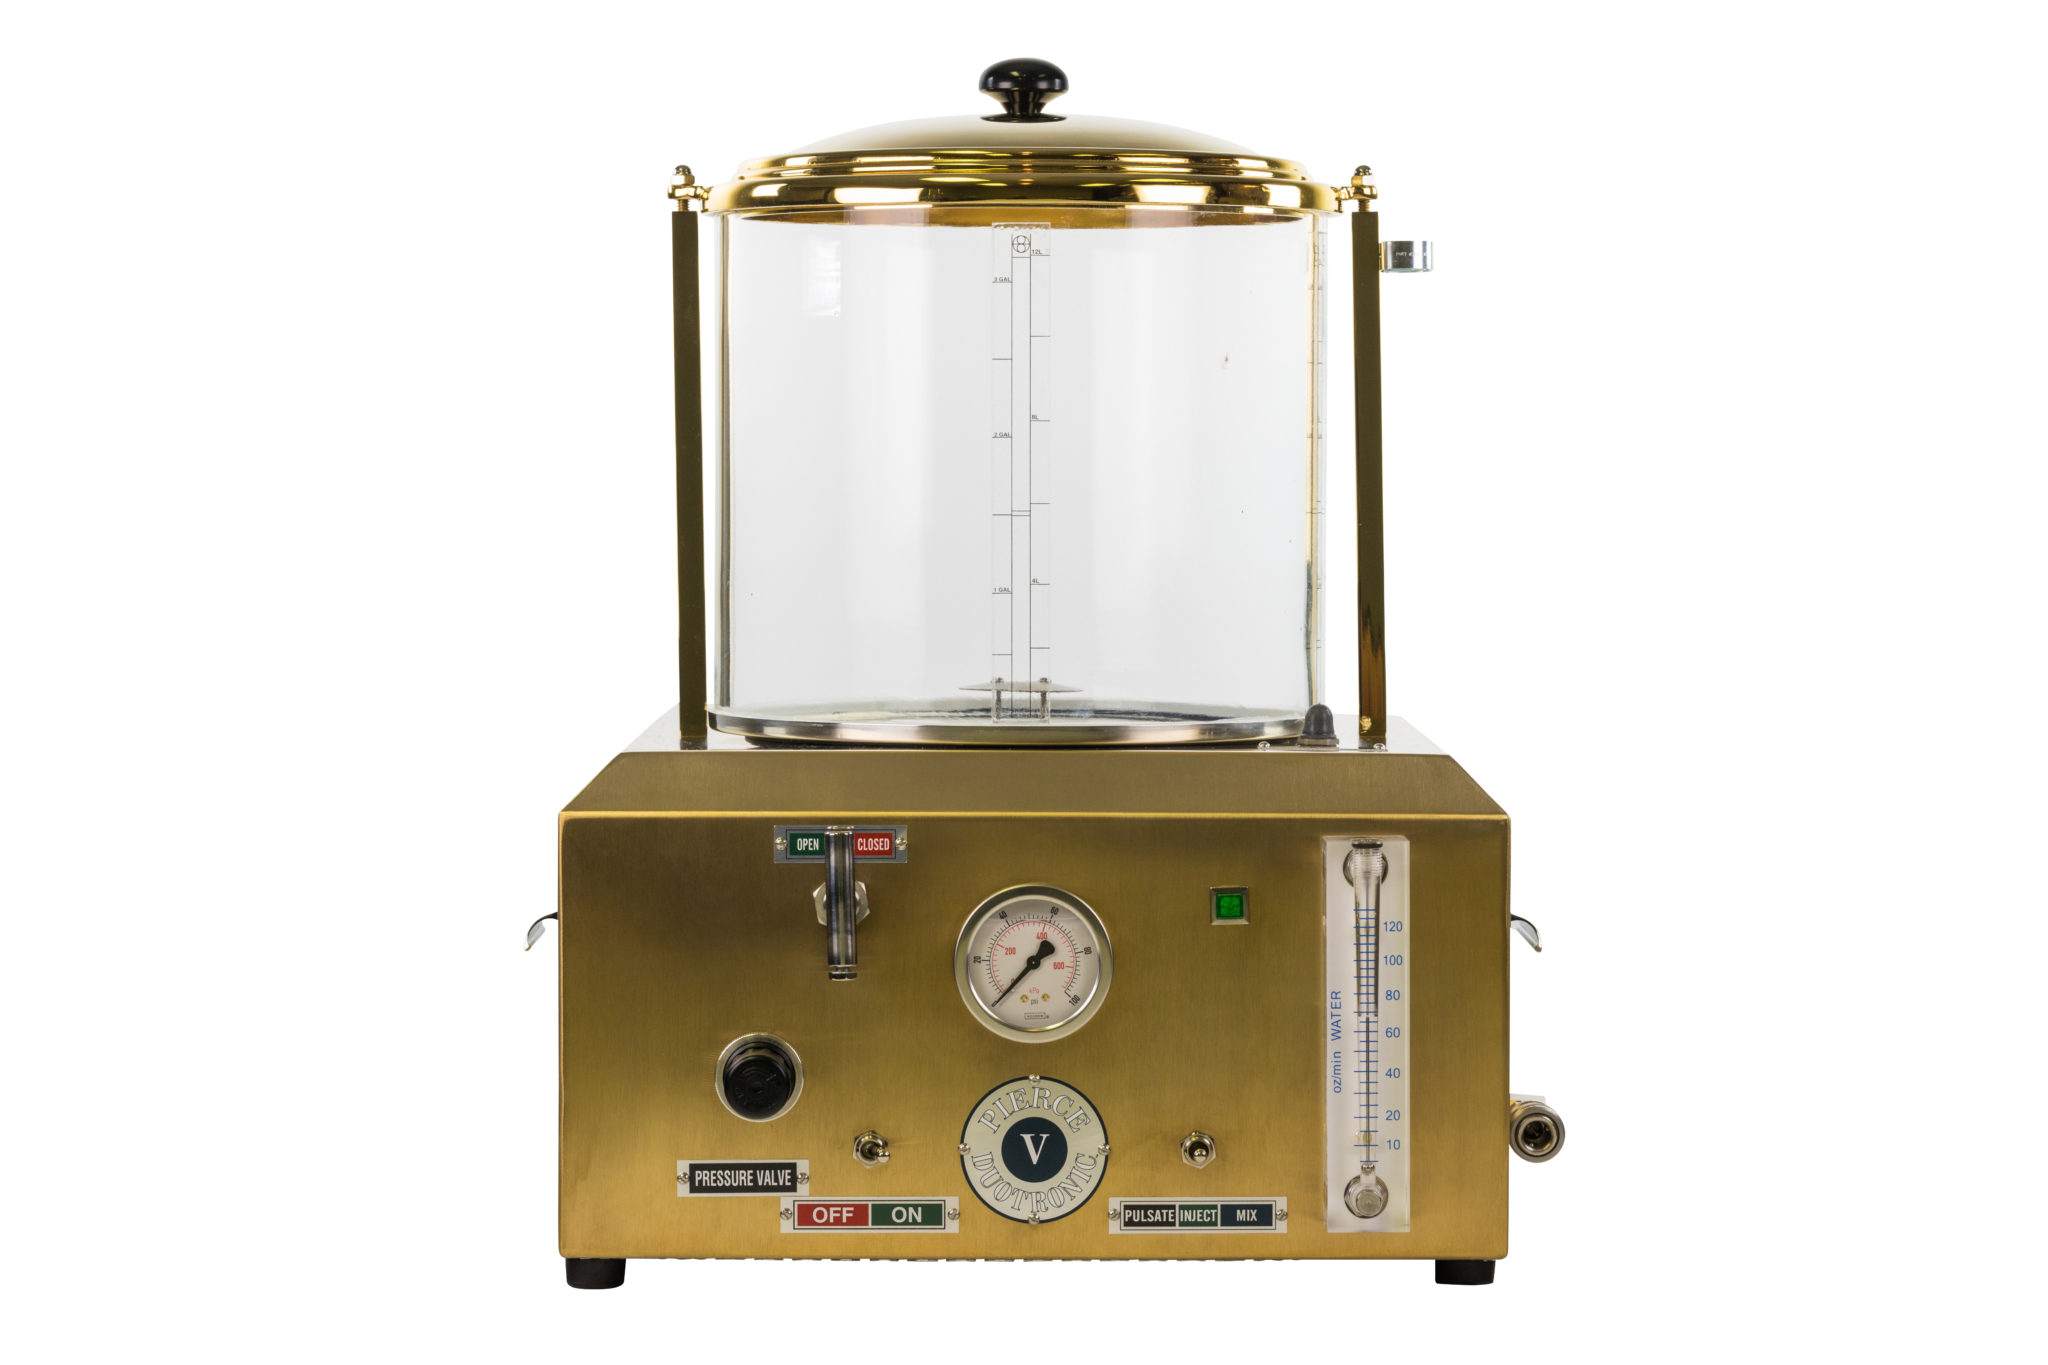 overal aardappel Observatie 50th Anniversary Gold-Plated Duotronic Embalming Machine to Be Raffled for  Charity | Connecting Directors